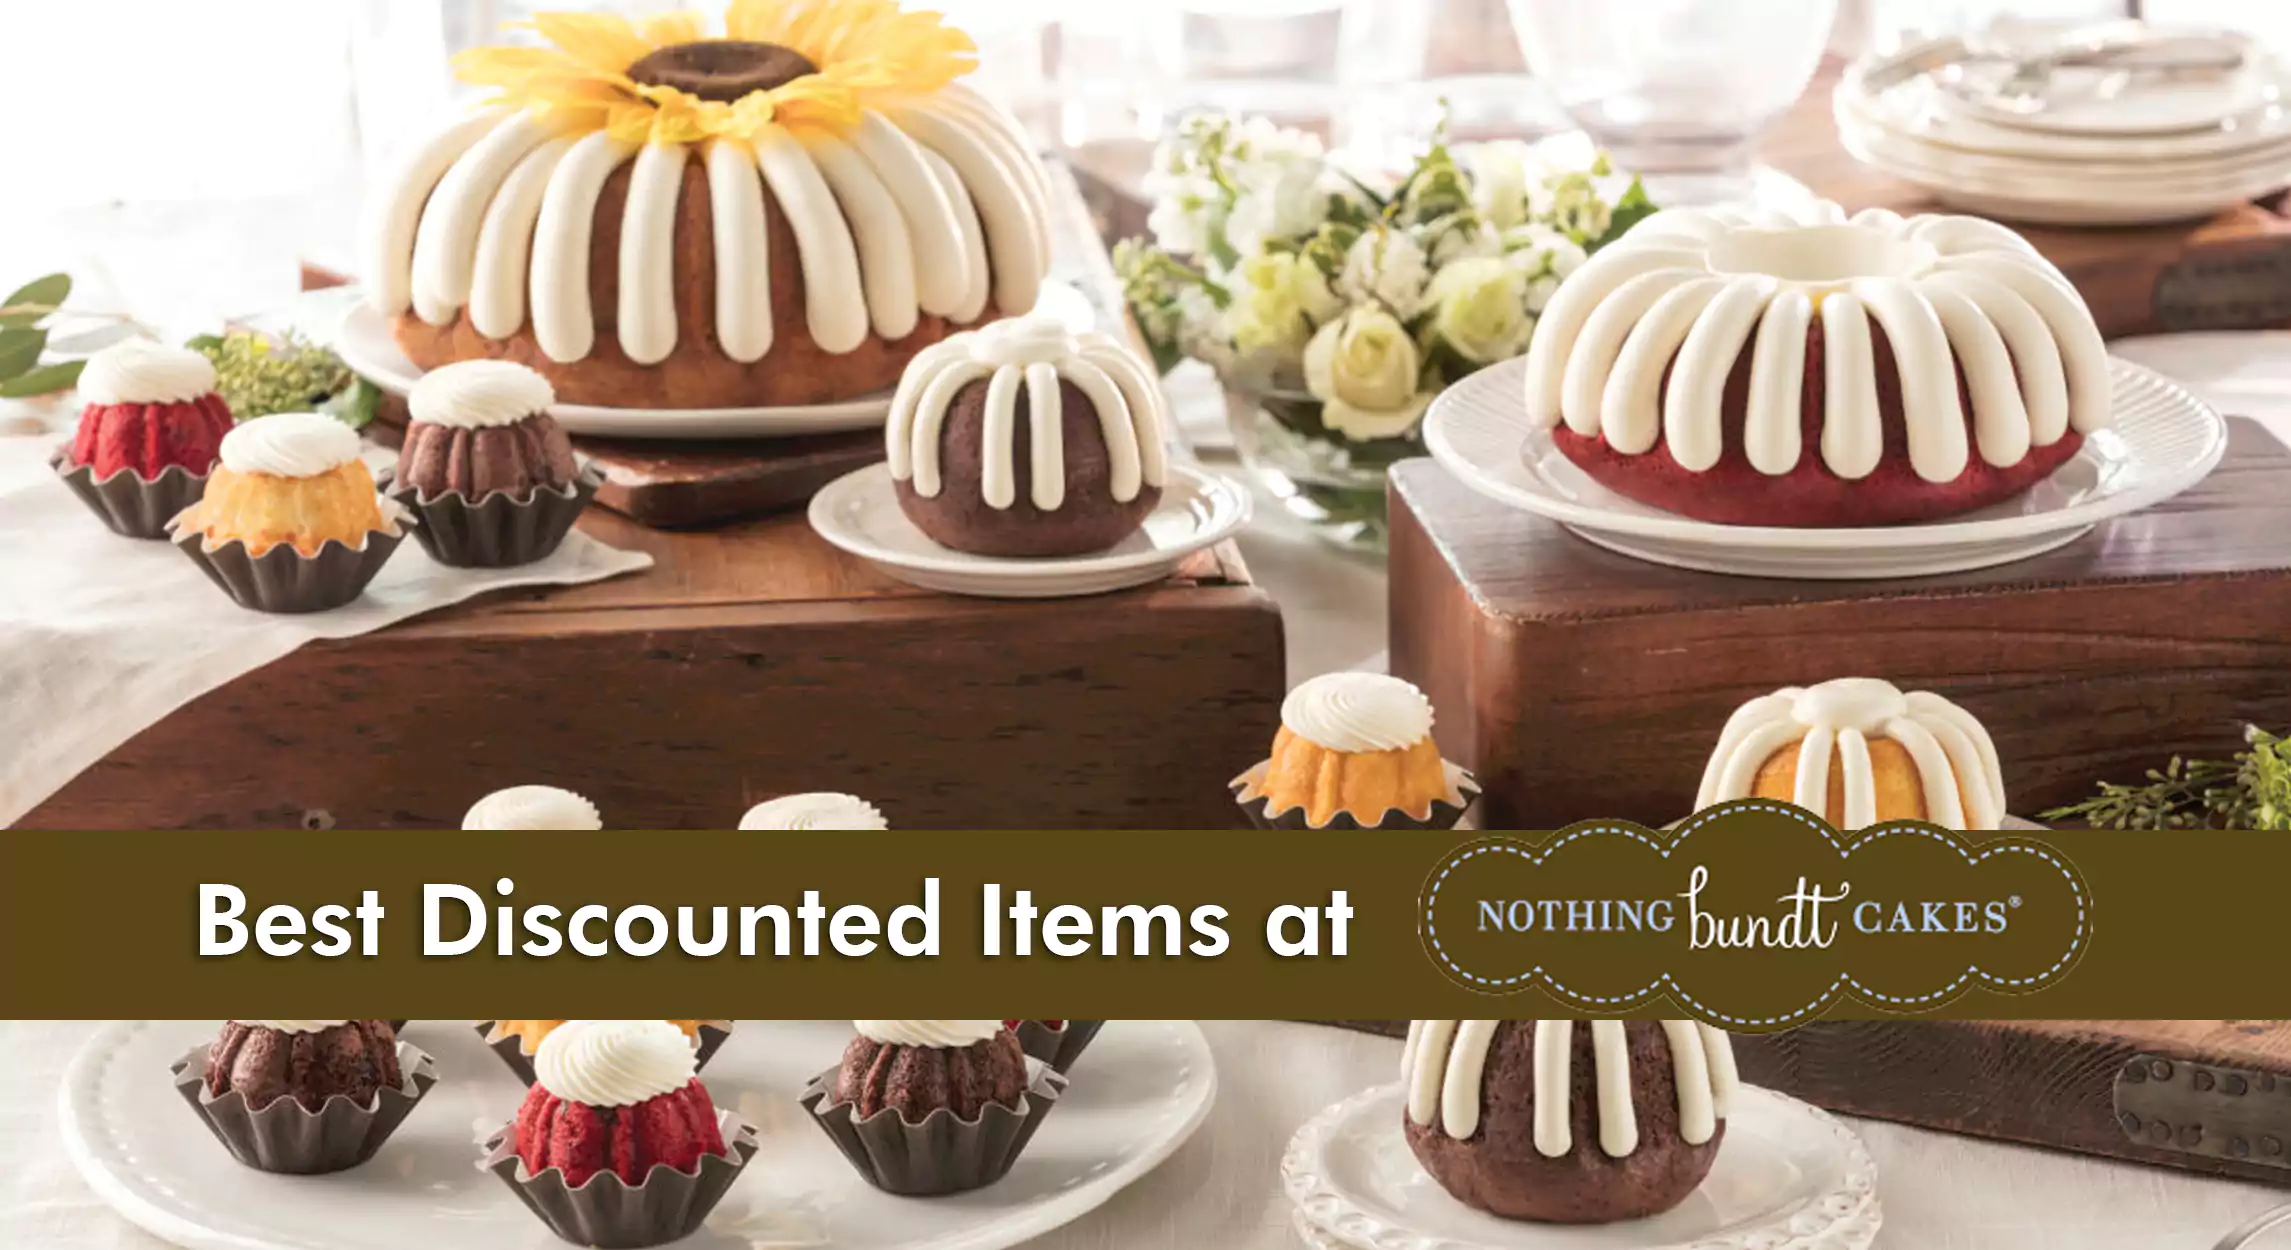 Best Discounted Items at Nothing Bundt Cakes